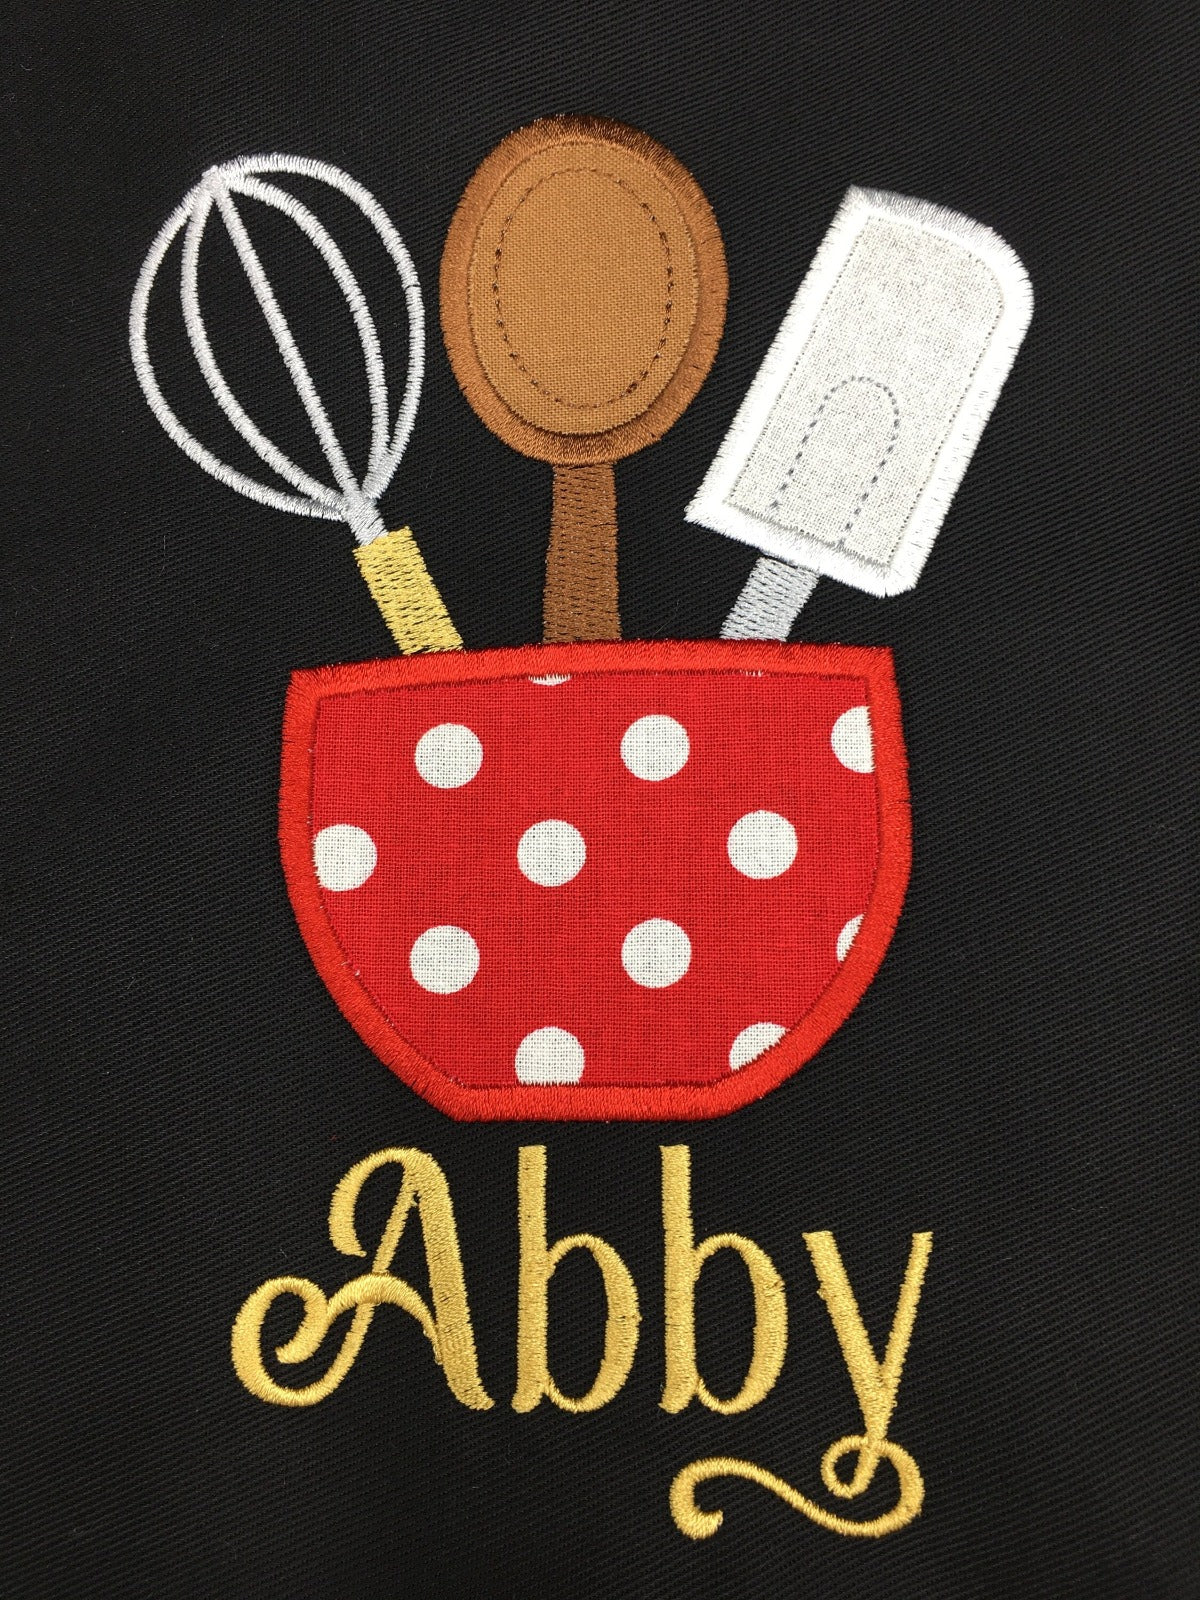 Girls personalized apron embroidery